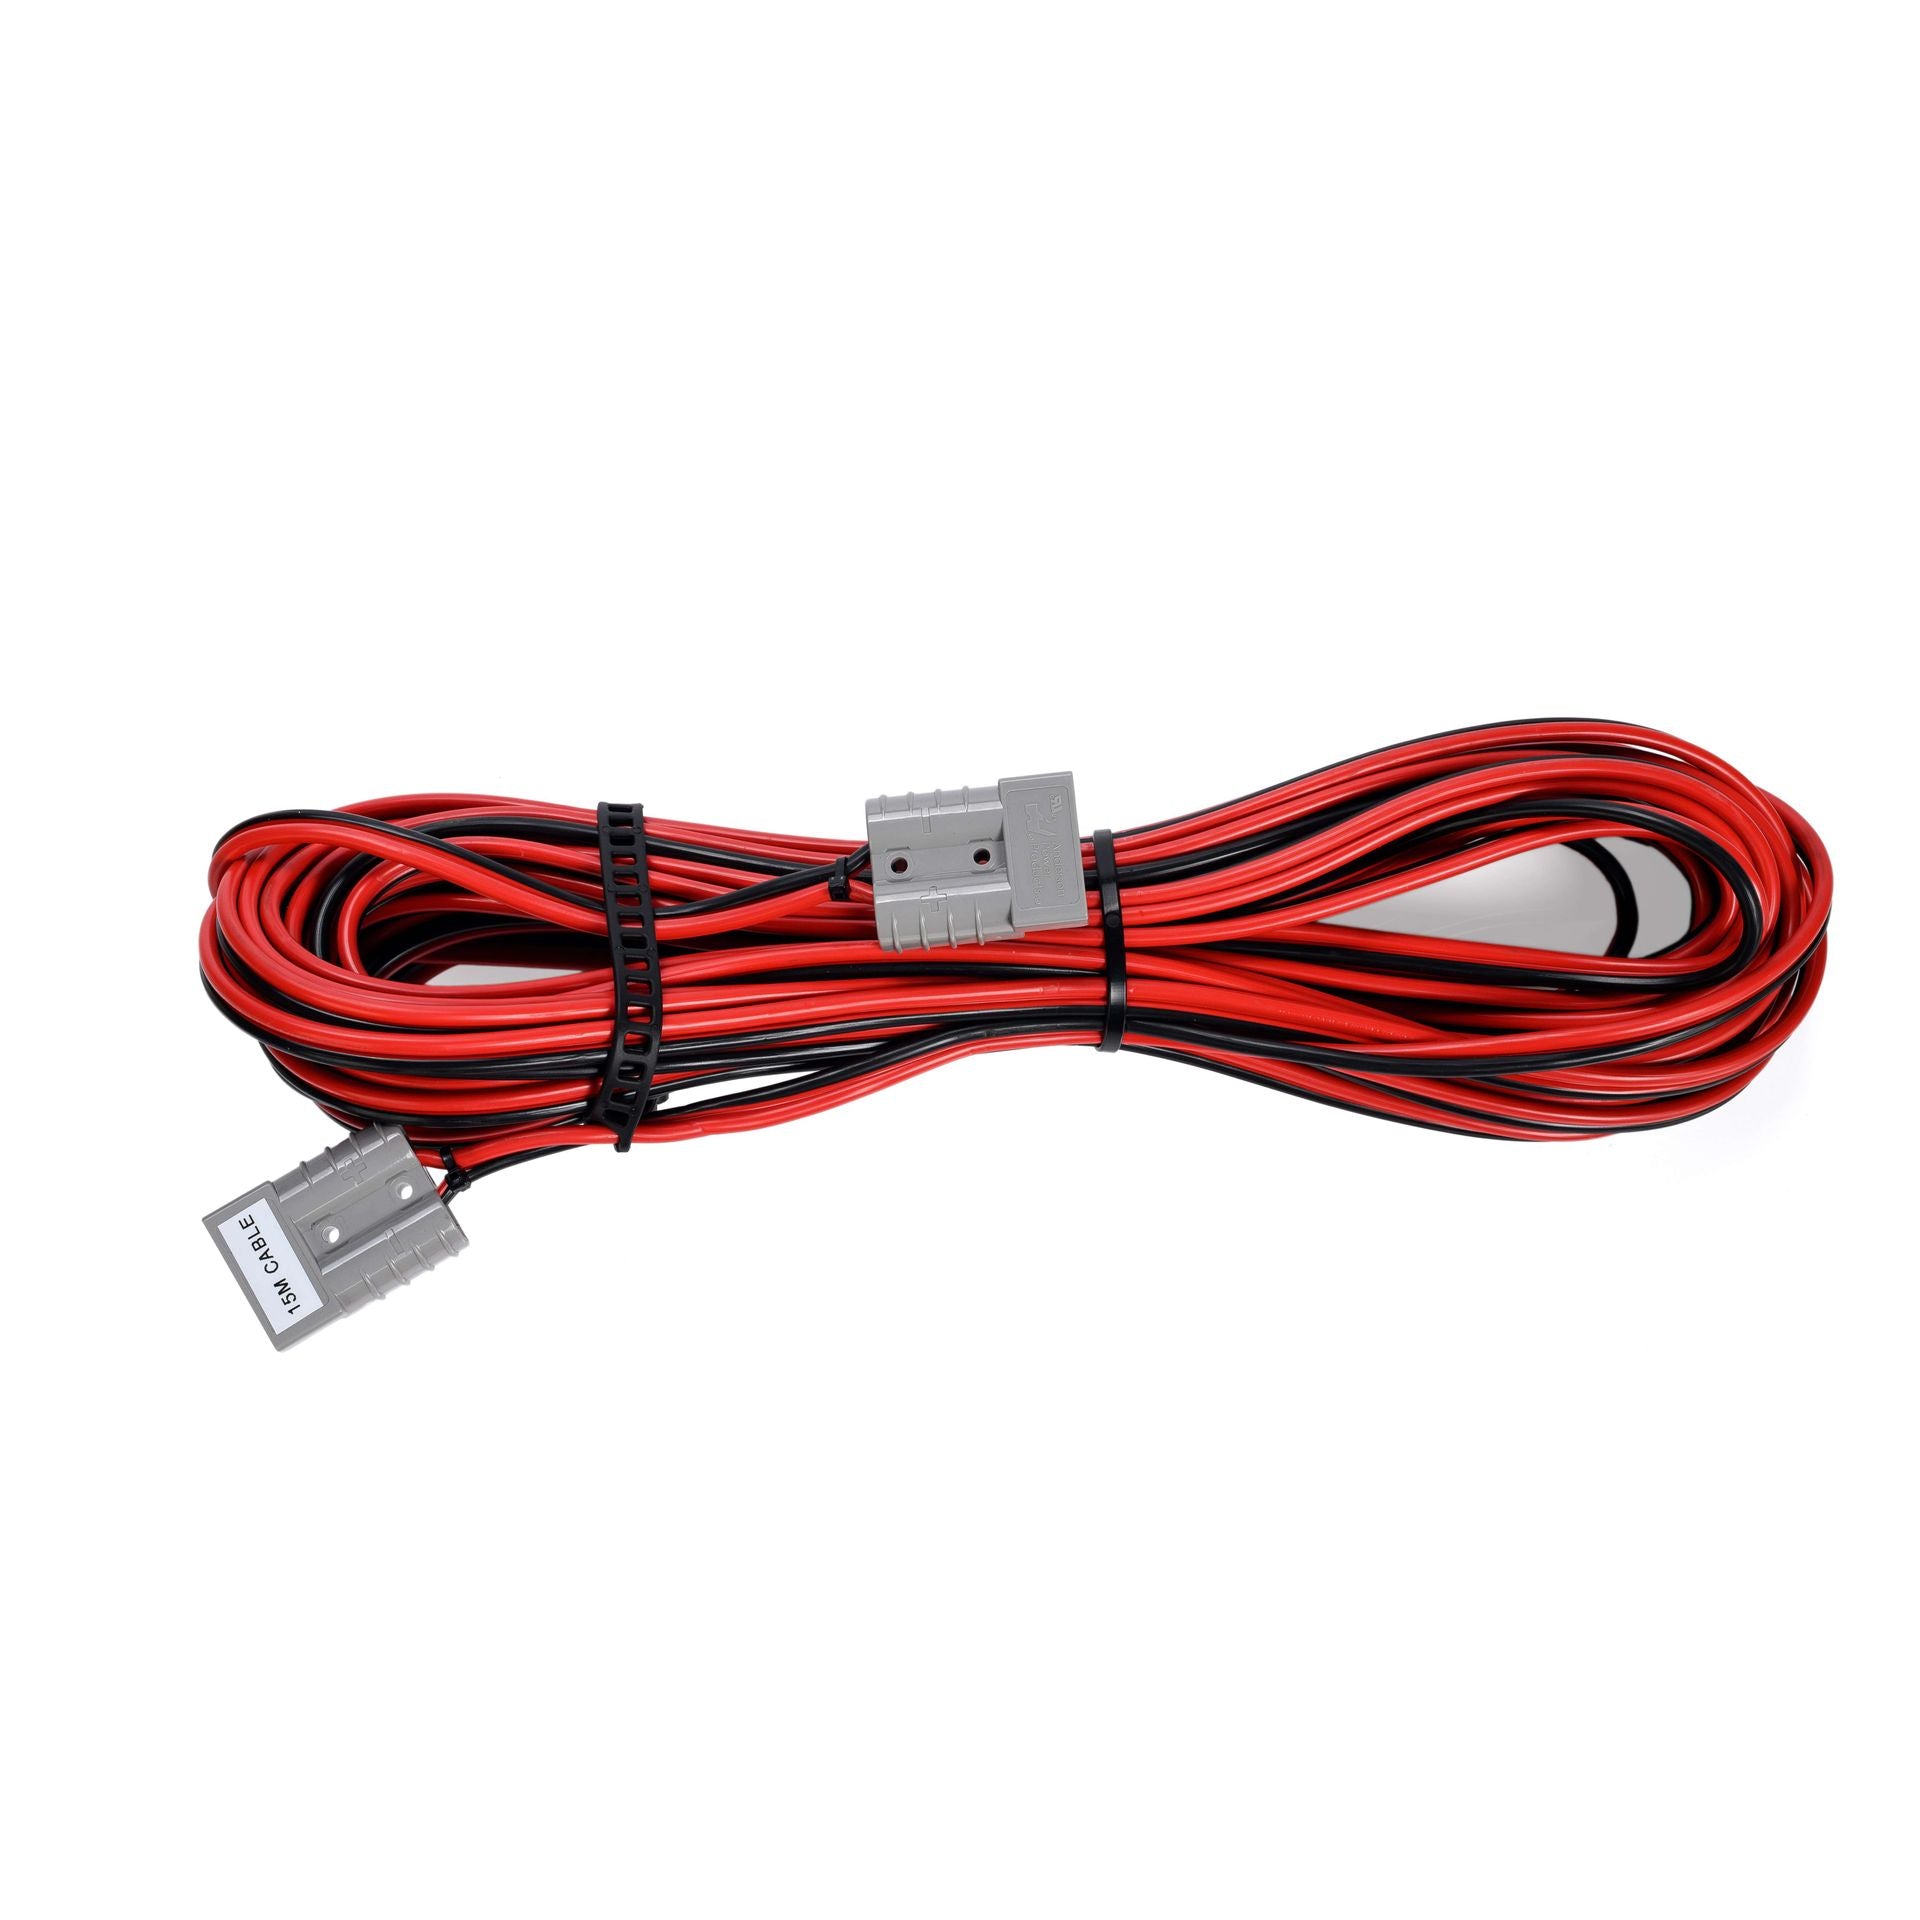 COMBO LITHIUM555, NAMIB150W, 10M EXTENSION CABLE - PLUG AND PLAY